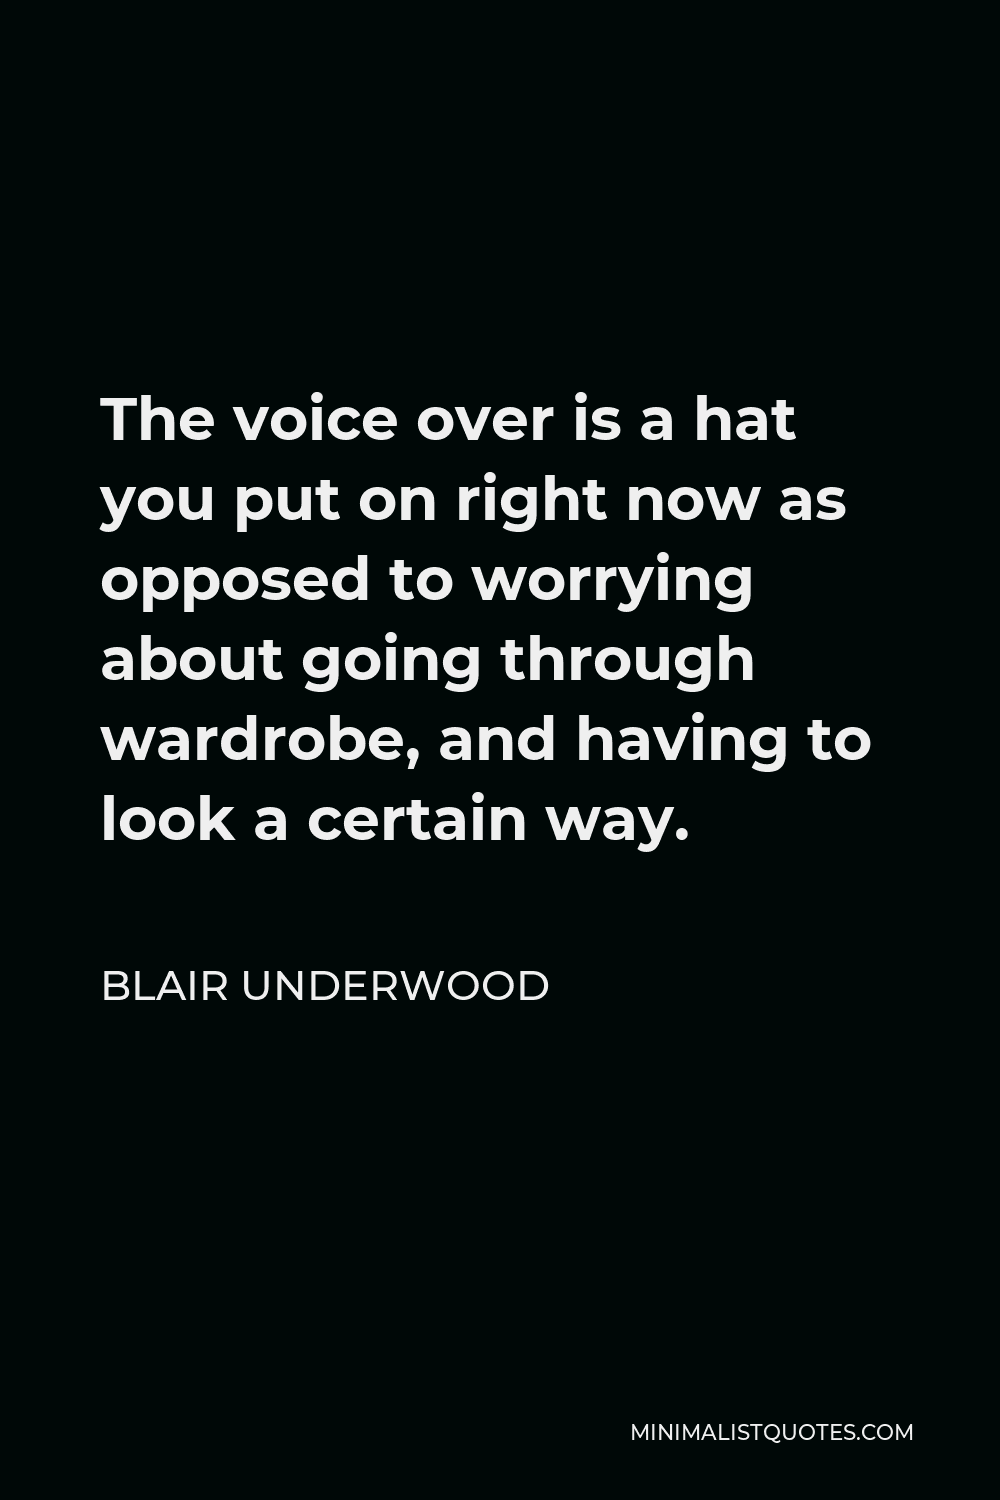 Blair Underwood Quote - The voice over is a hat you put on right now as opposed to worrying about going through wardrobe, and having to look a certain way.